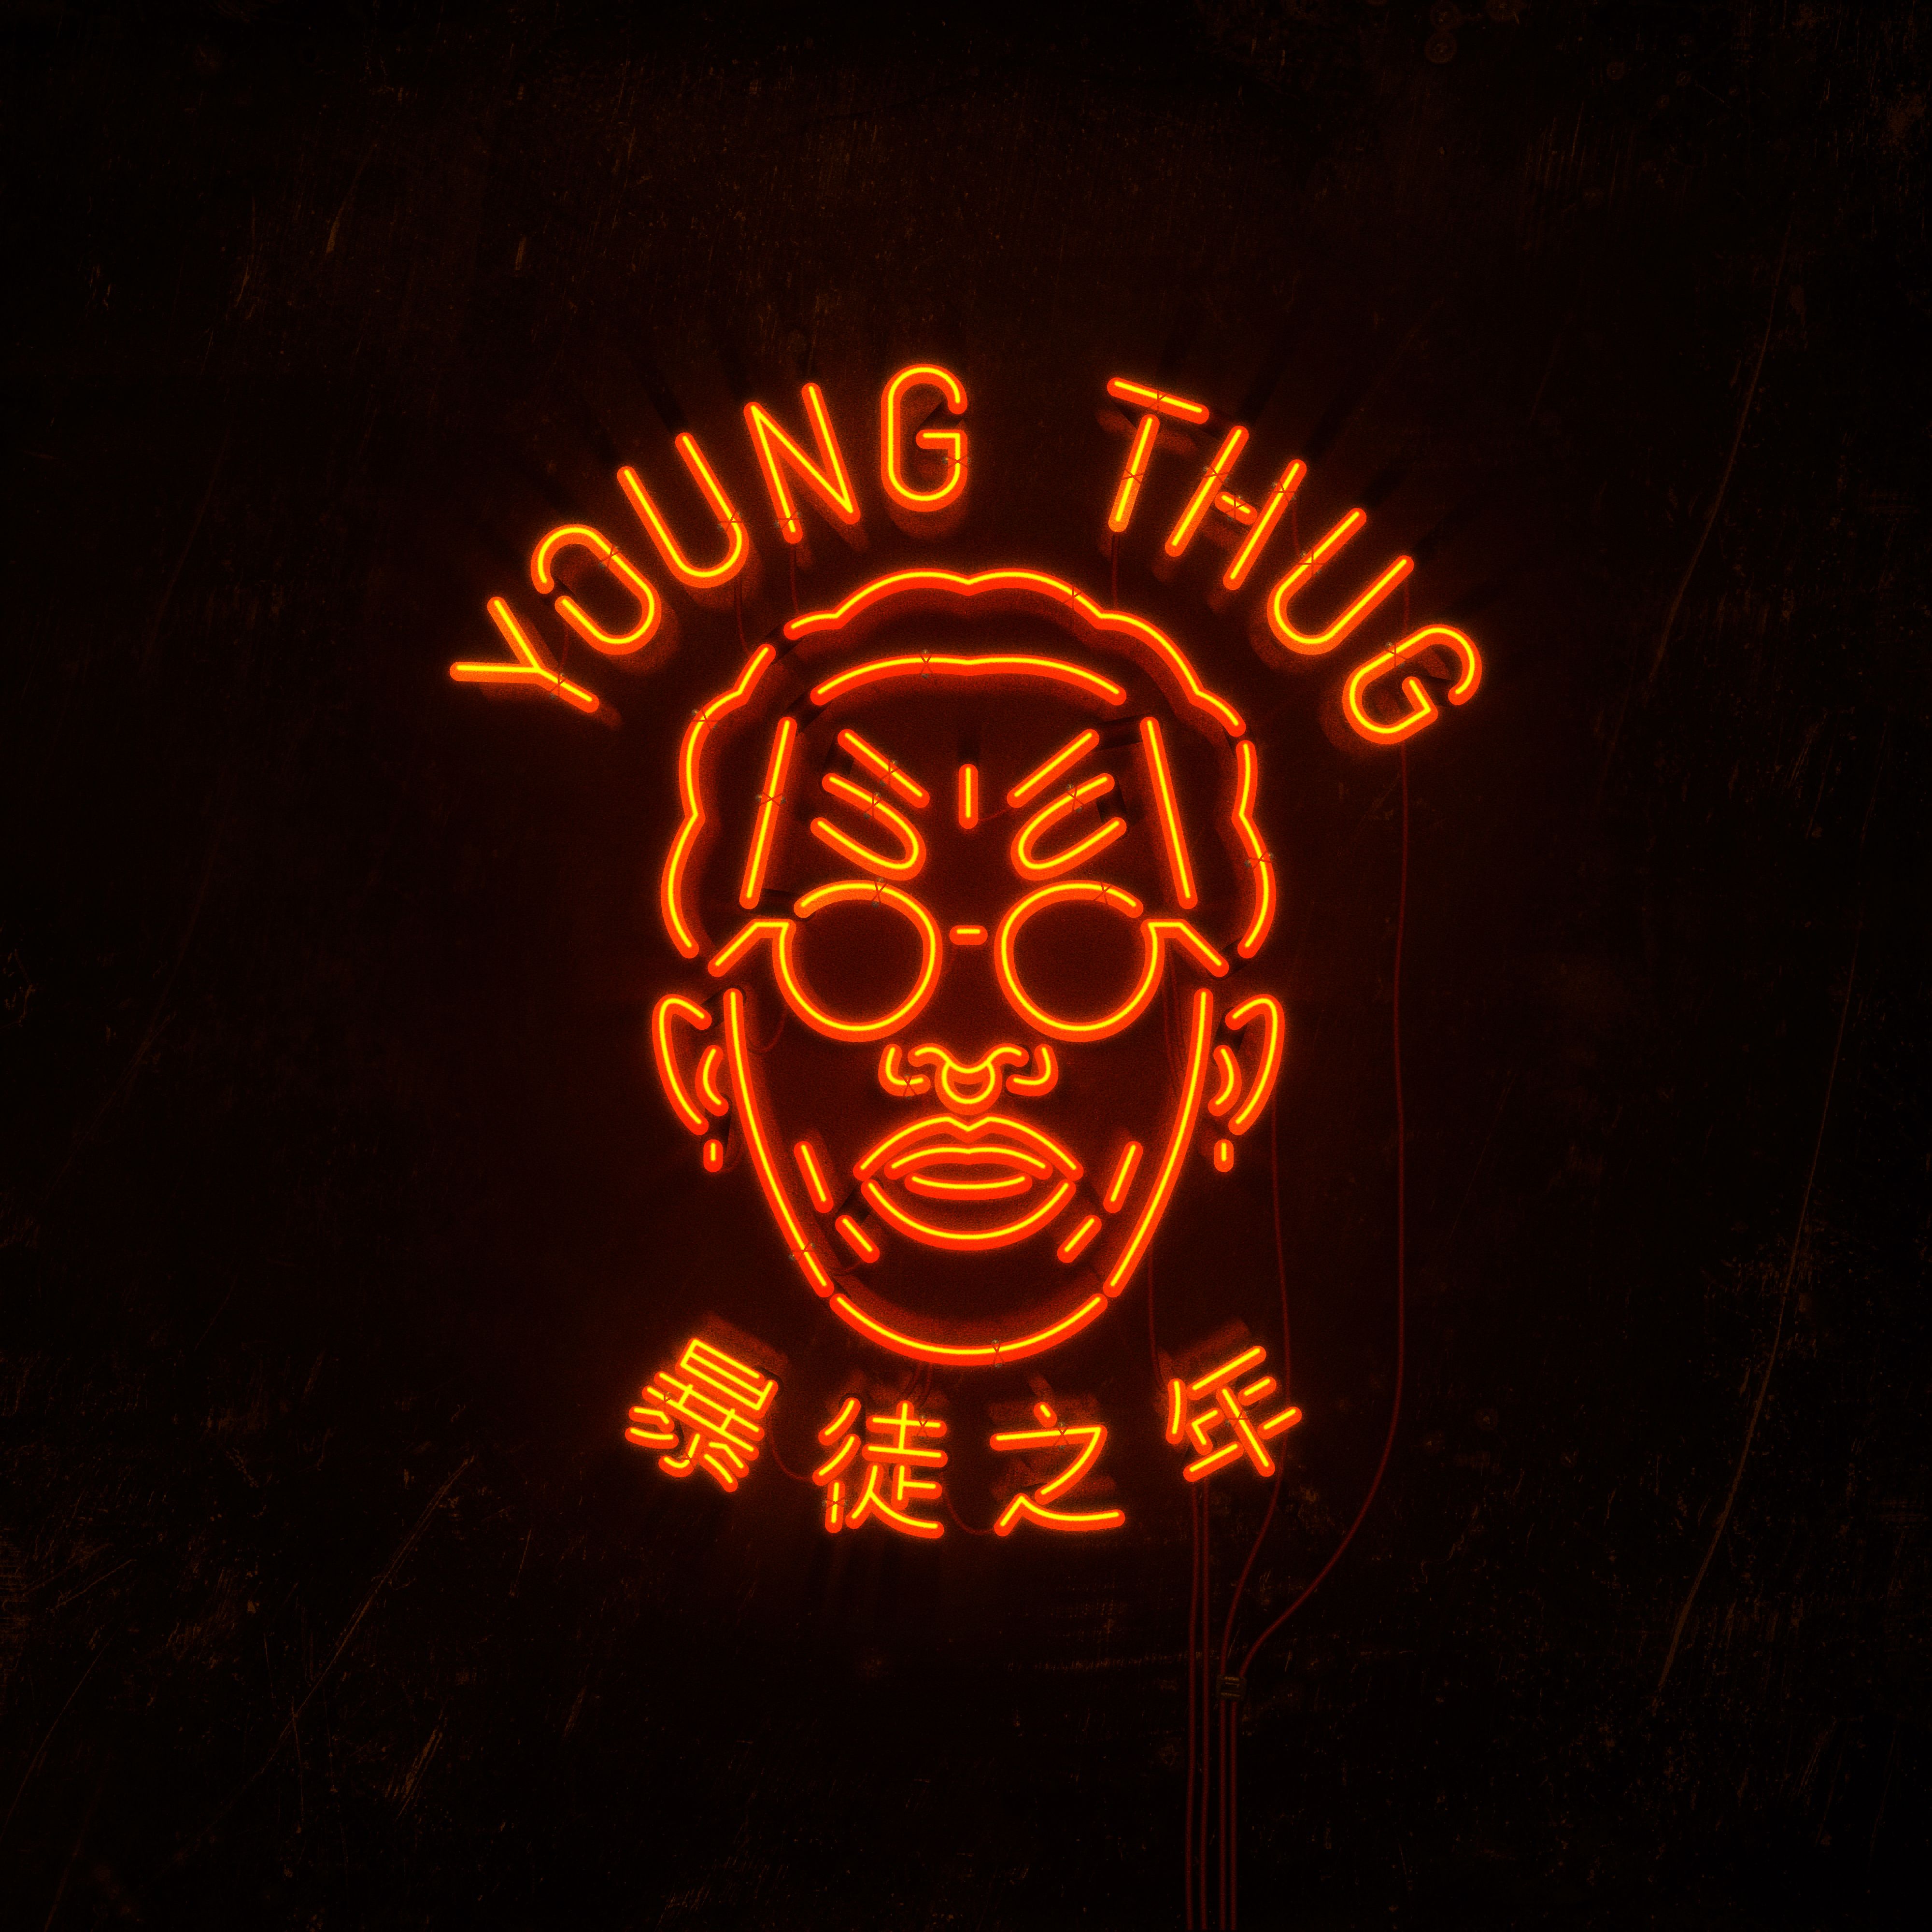 Check out this project: “Young Thug: Year of the Thug